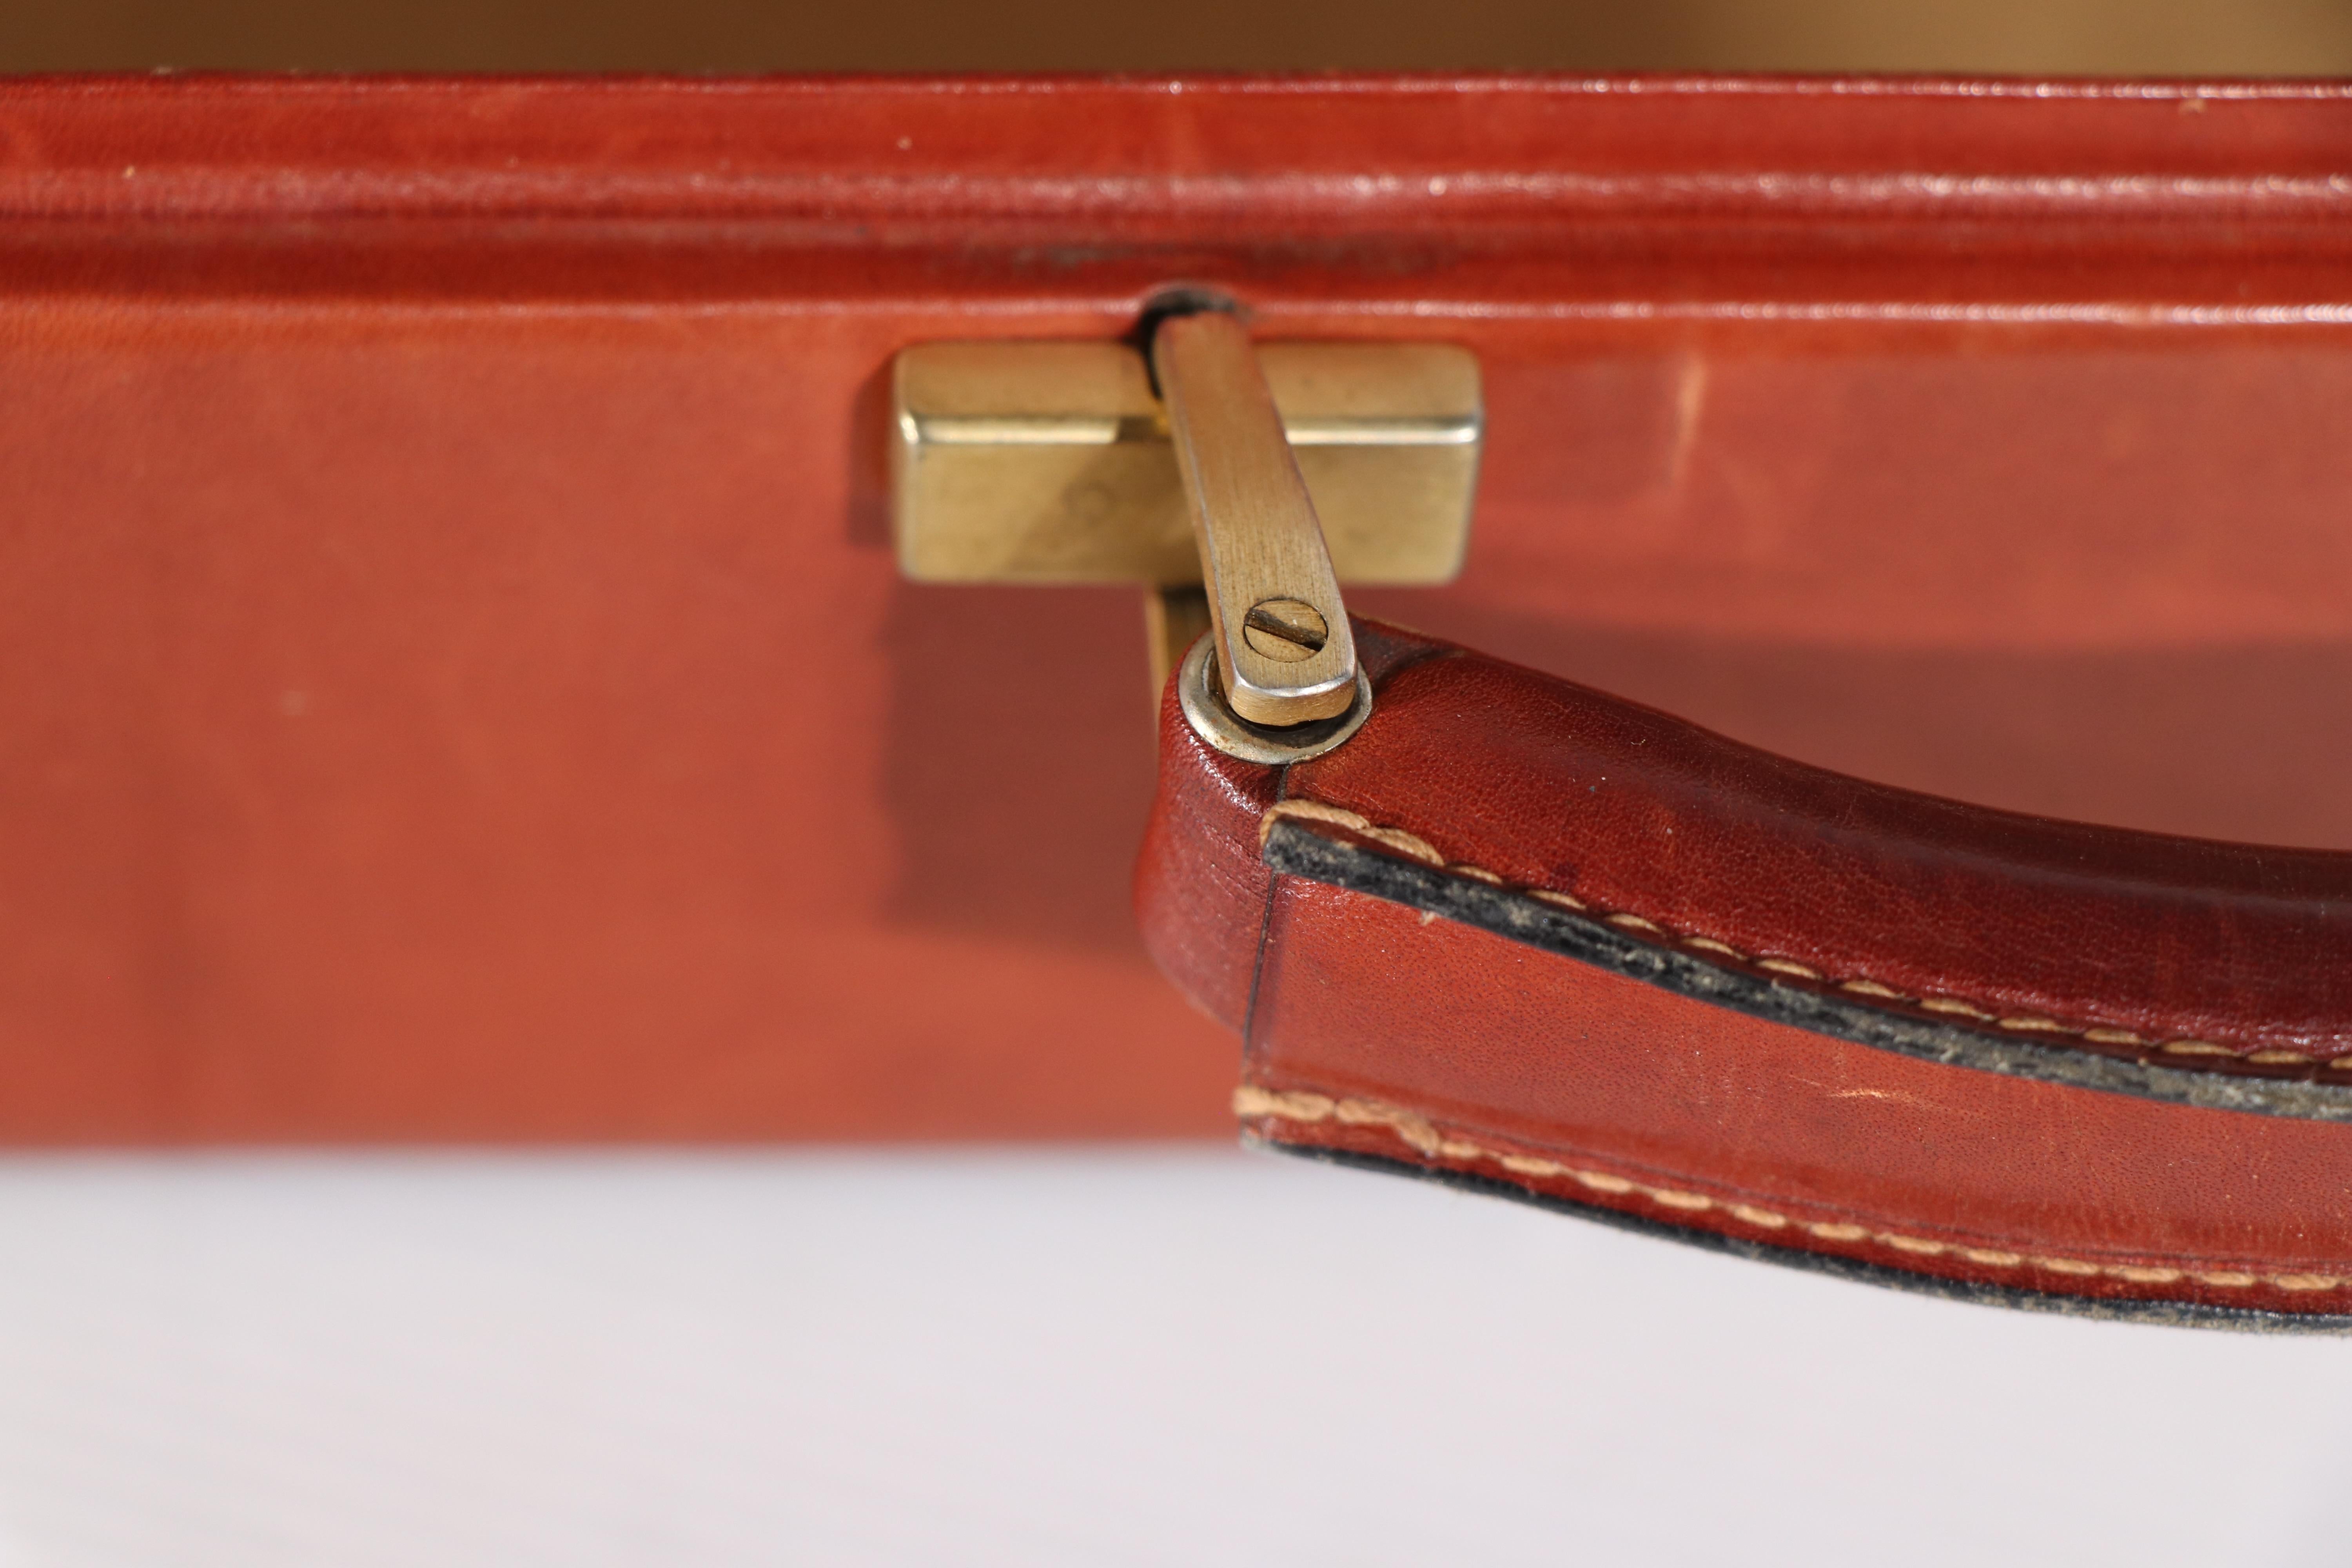 American  Mid Century Art Deco Hard Case Leather Attache Briefcase  after Bally, Hermes  For Sale